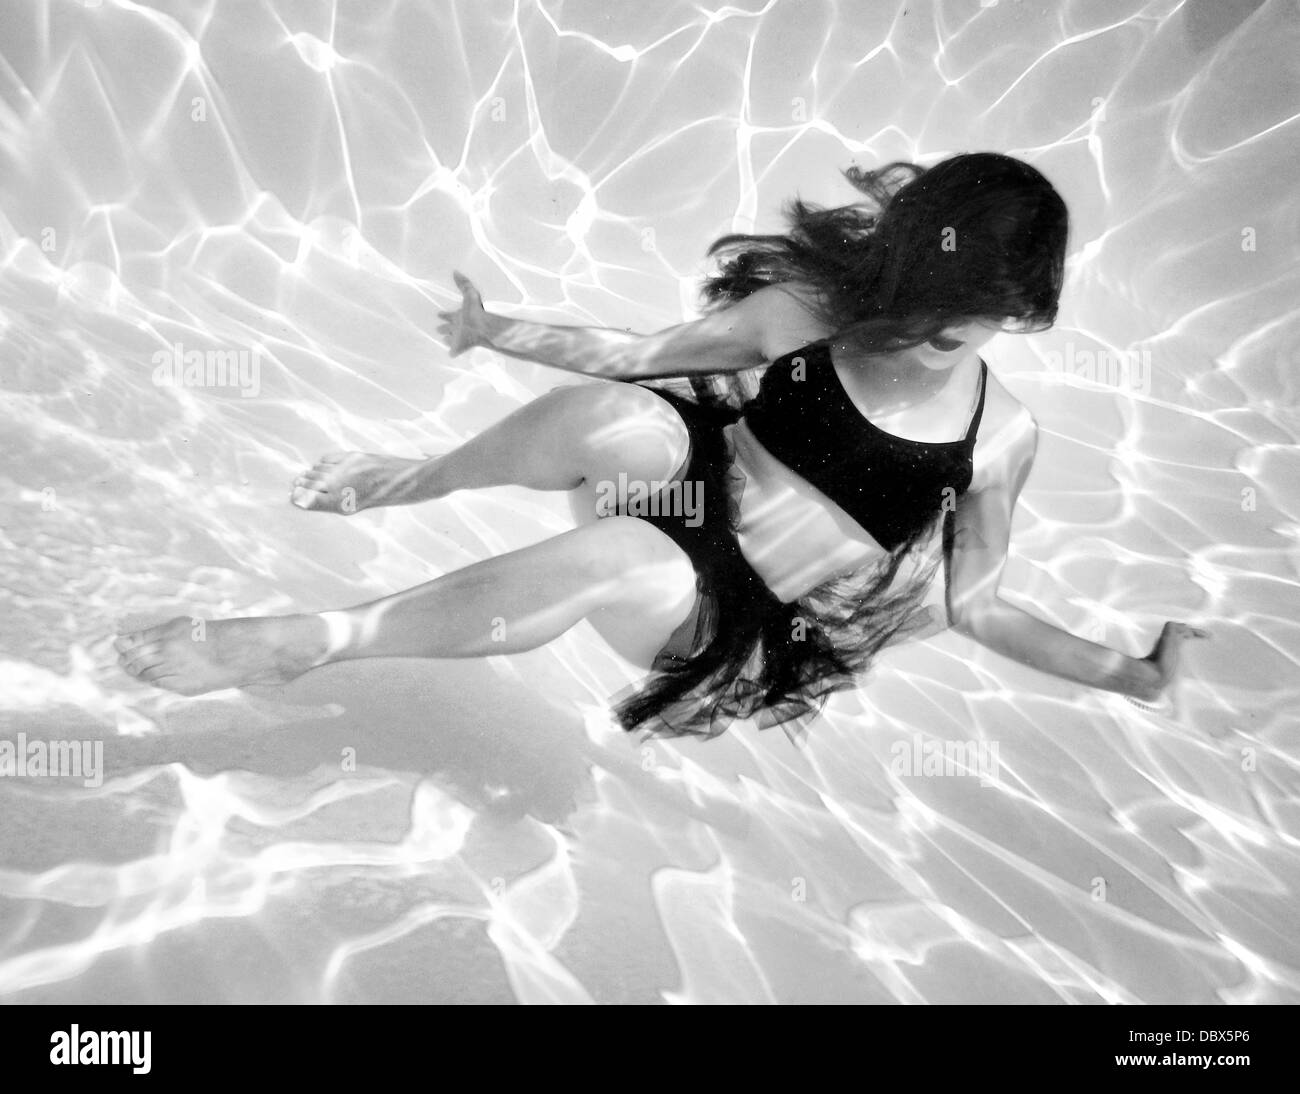 Underwater fashion photograph of a model and dancer in the water Stock Photo